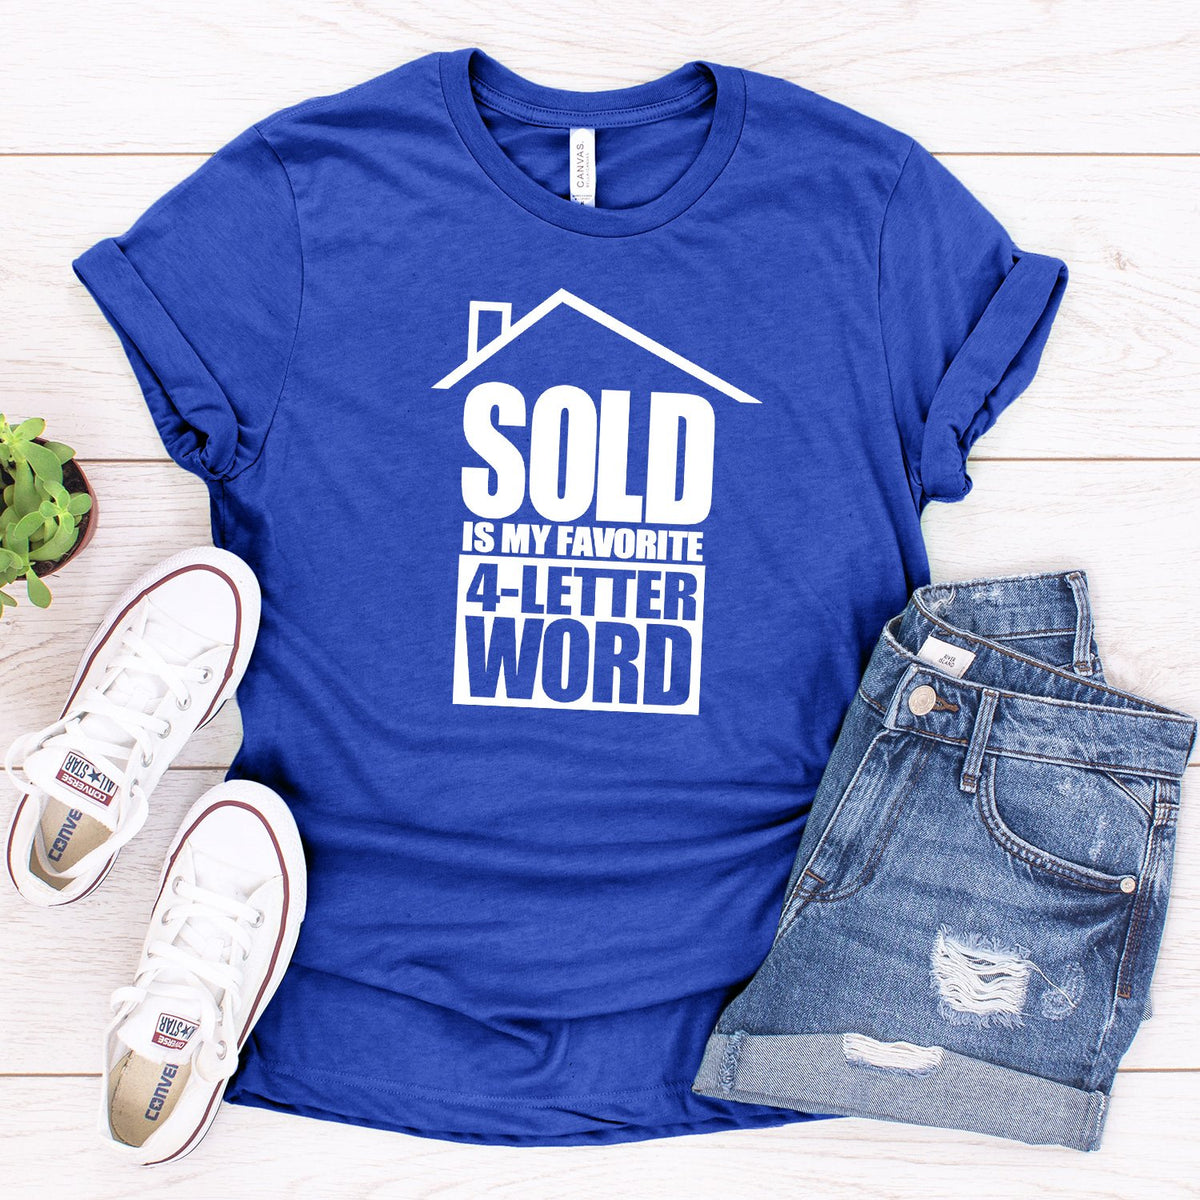 SOLD is My Favorite 4-Letter Word - Short Sleeve Tee Shirt